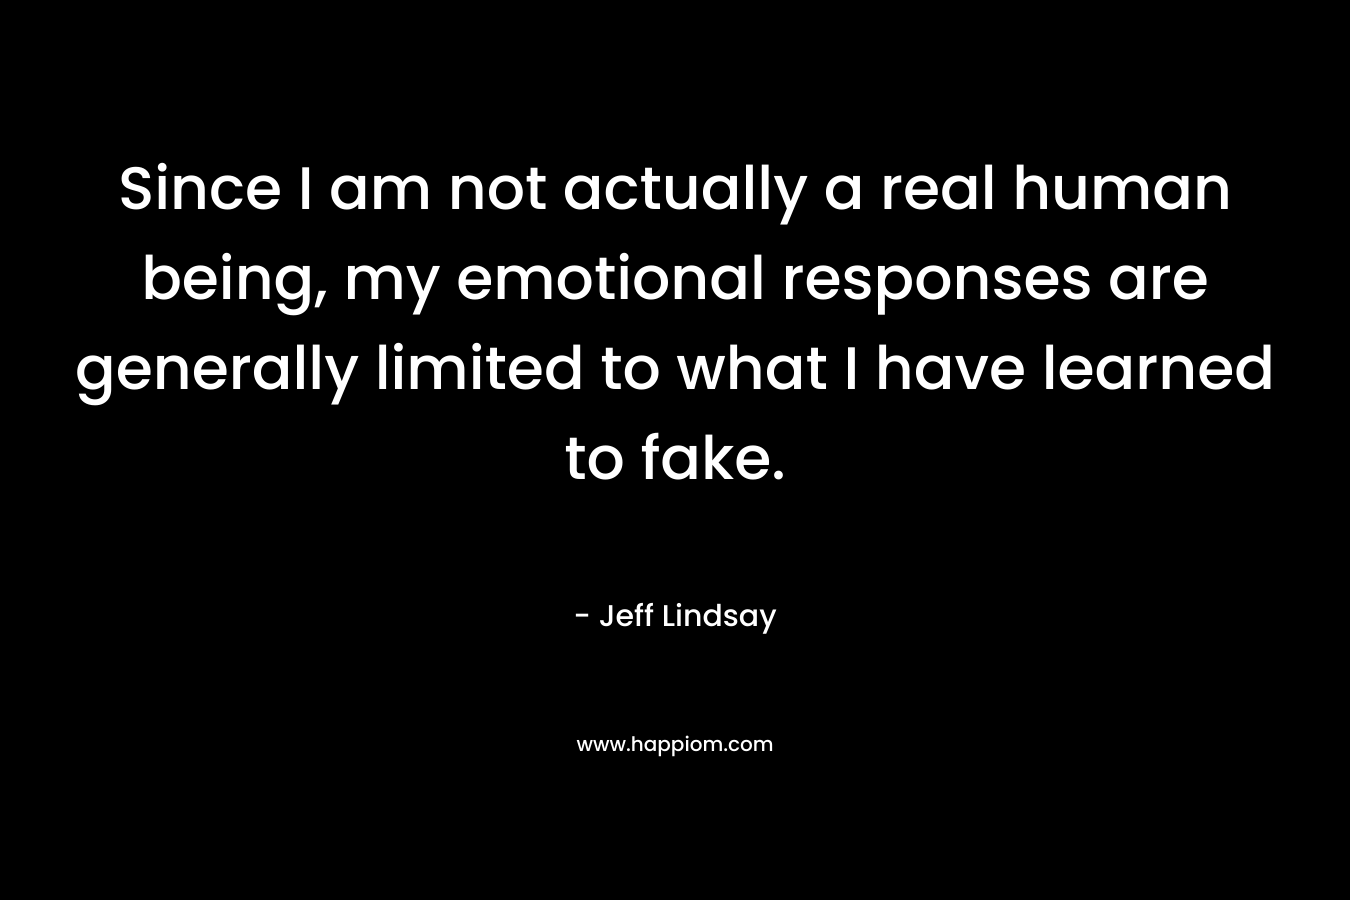 Since I am not actually a real human being, my emotional responses are generally limited to what I have learned to fake. – Jeff Lindsay